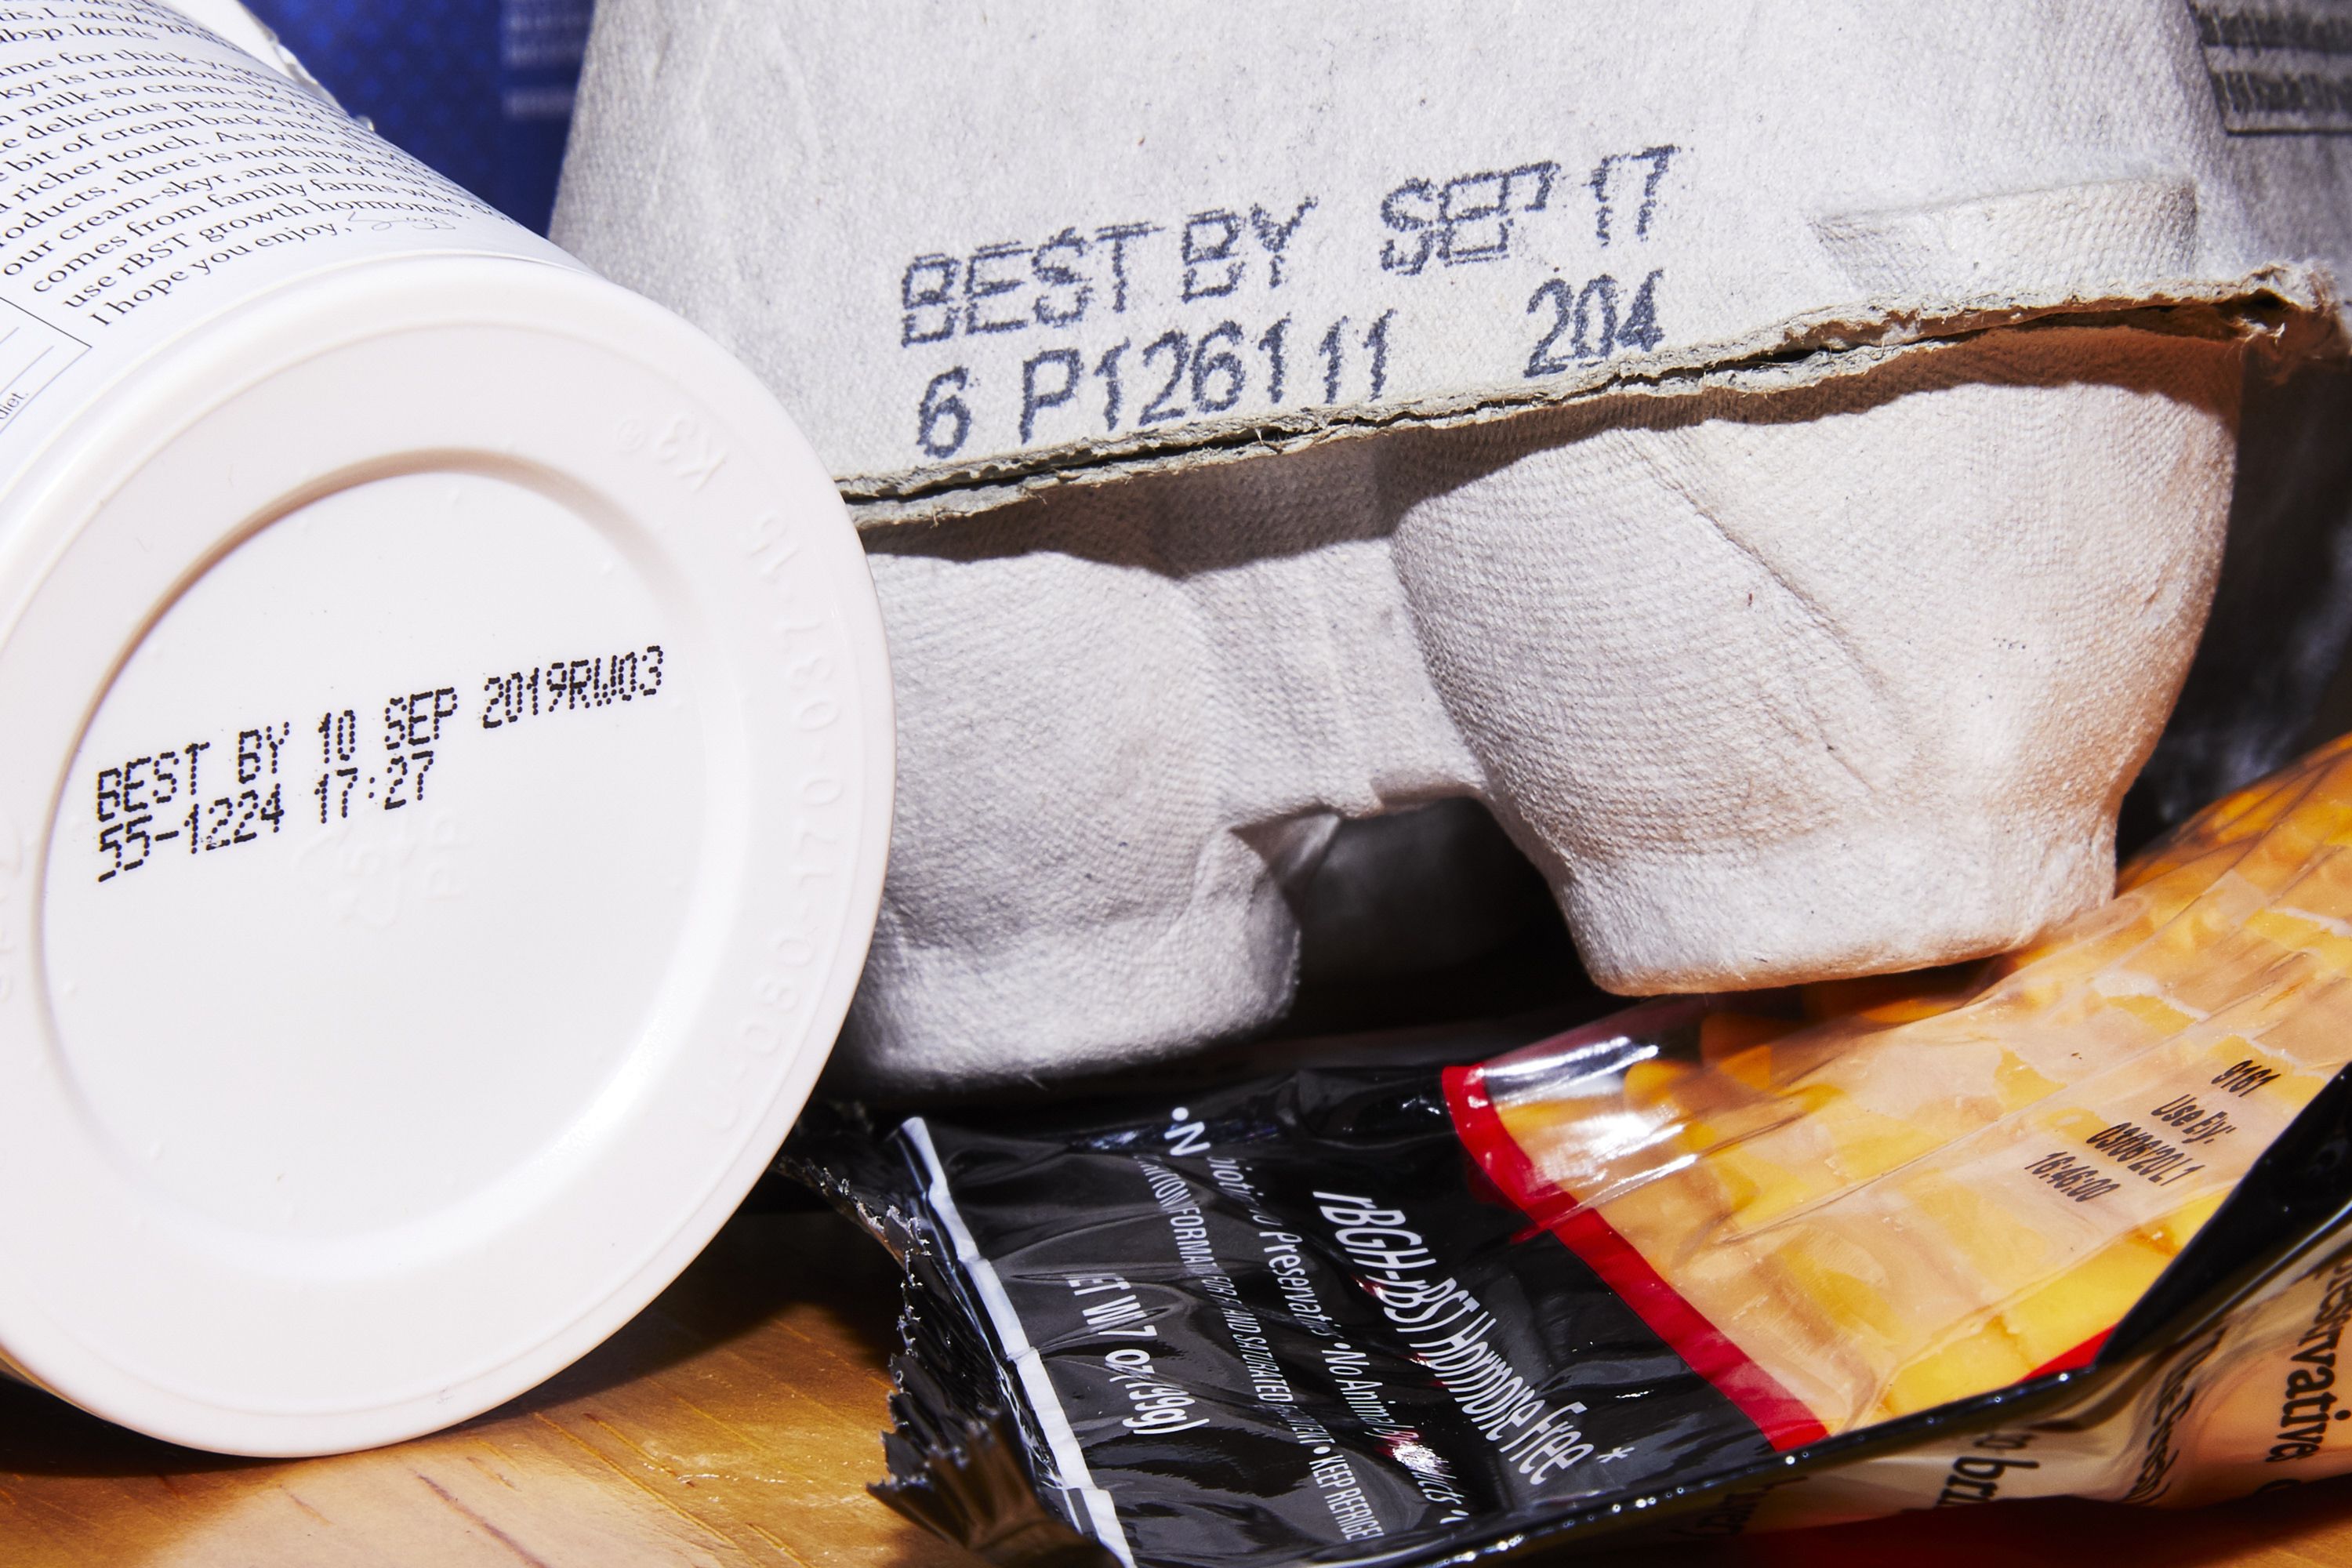 Easy Ways to Read Expiration Dates: 8 Steps (with Pictures)